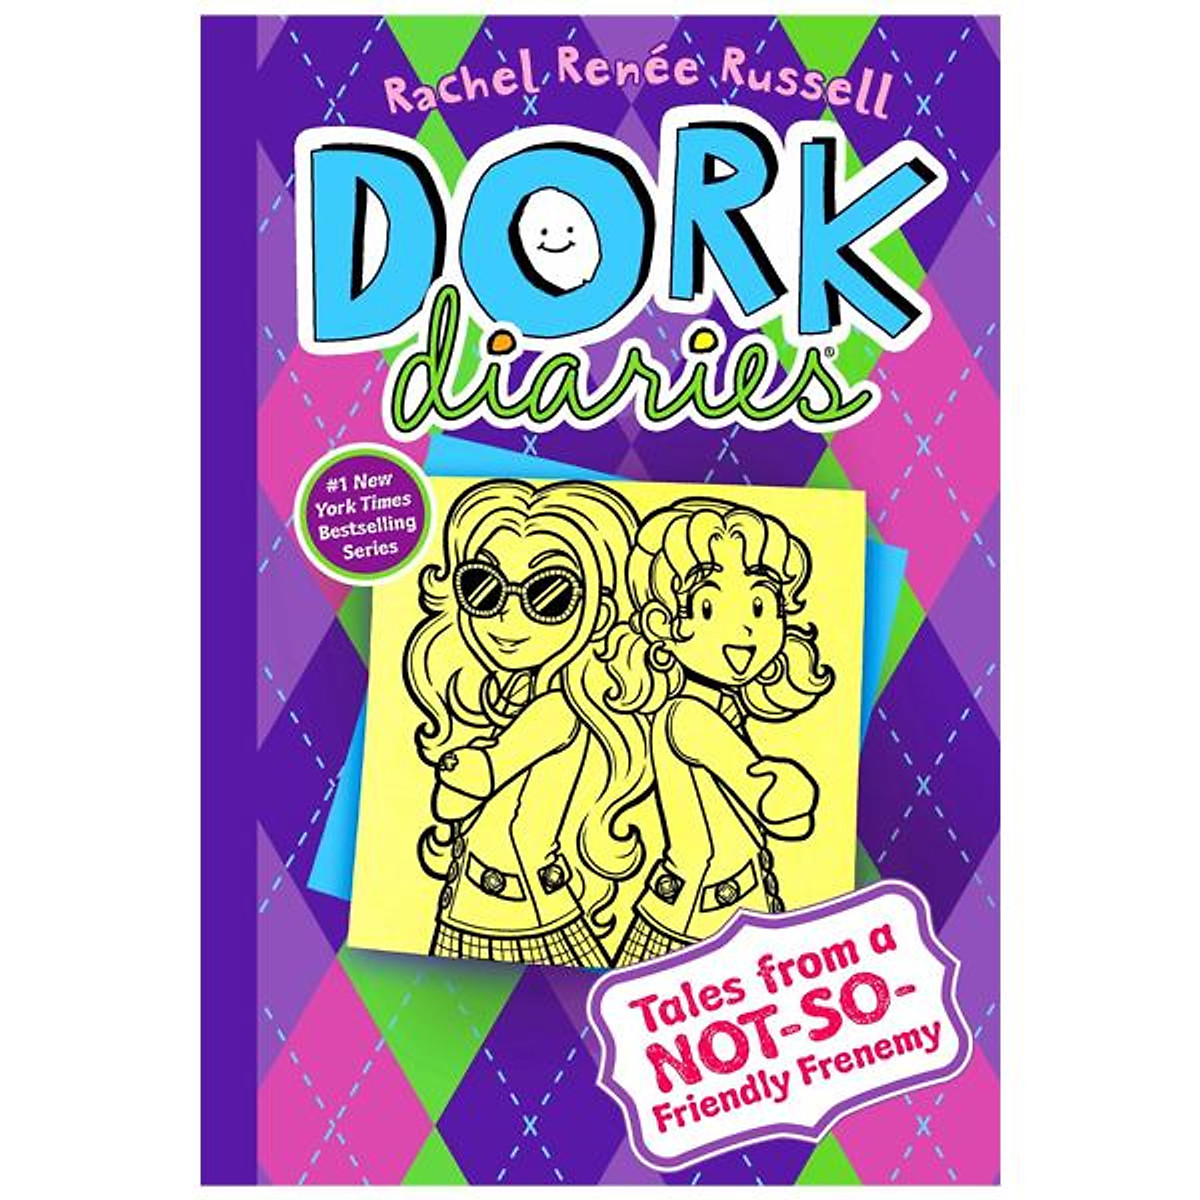 Tales from a Not-So-Friendly Frenemy (Dork Diaries) Hardcover